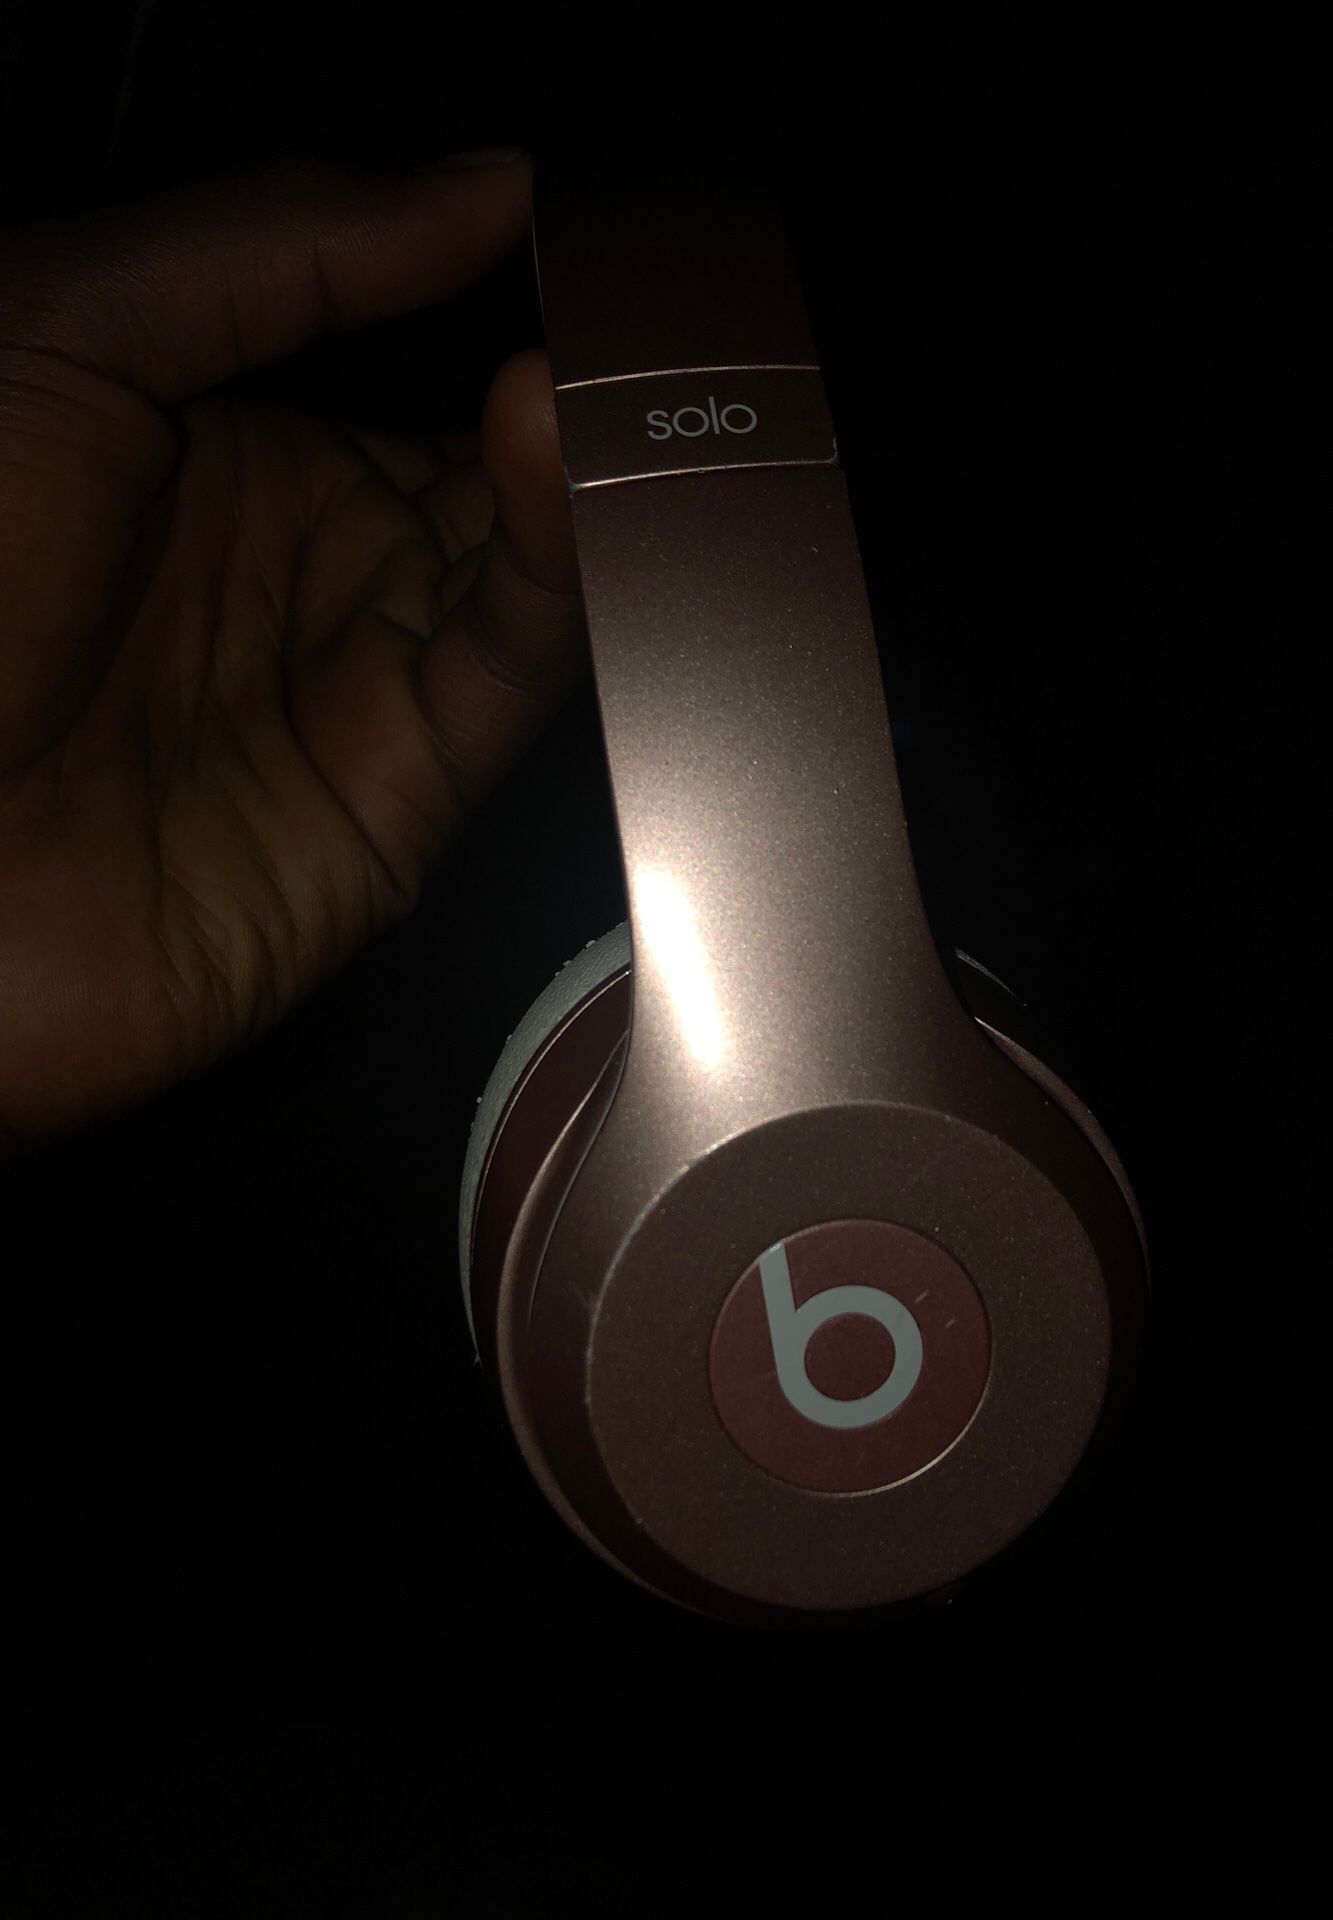 Beats solo great condition